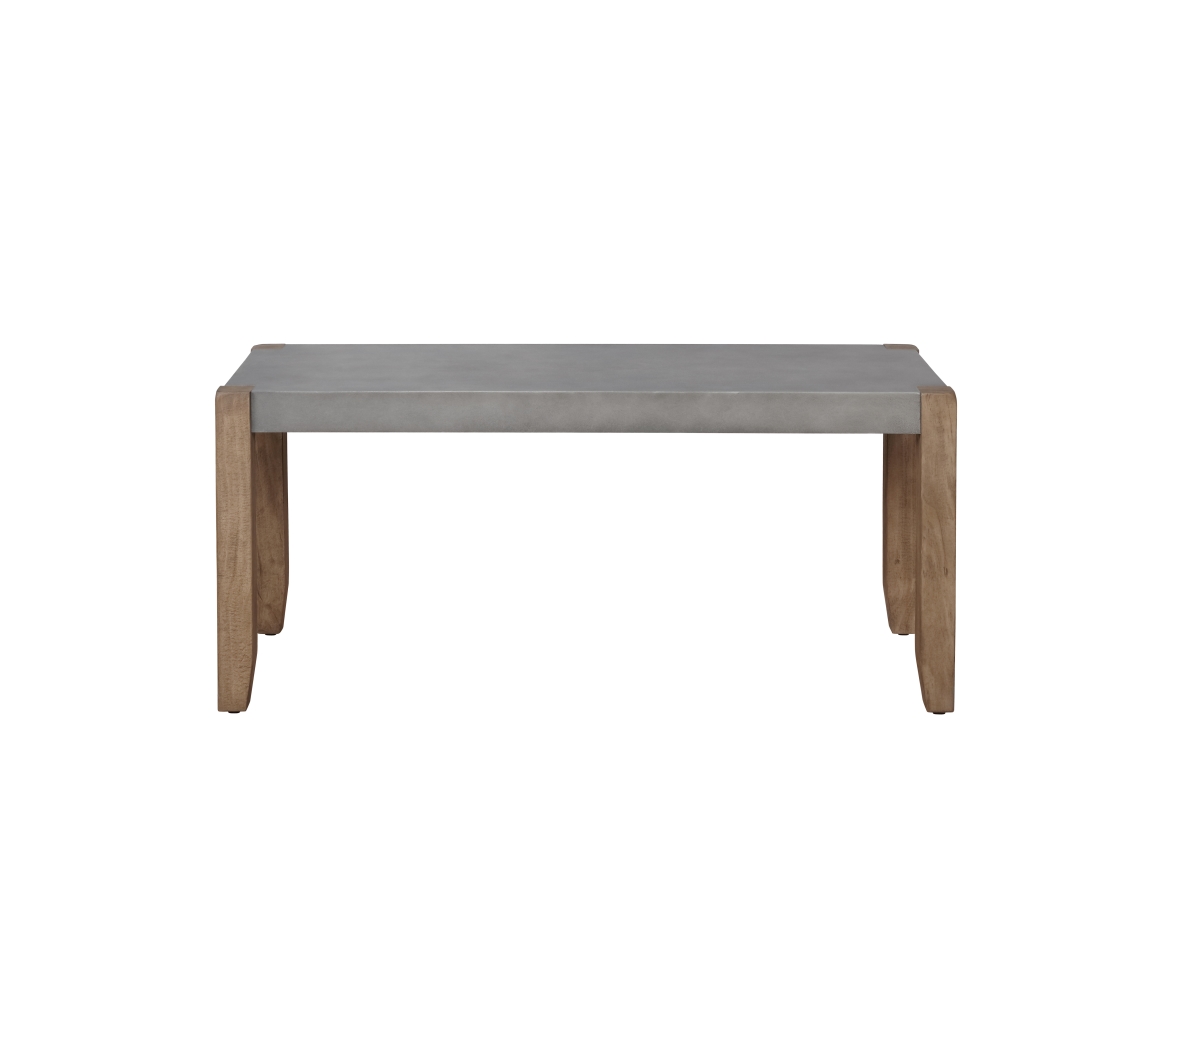 Picture of Alaterre ANNP0371 40 in. Newport Faux Concrete Bench